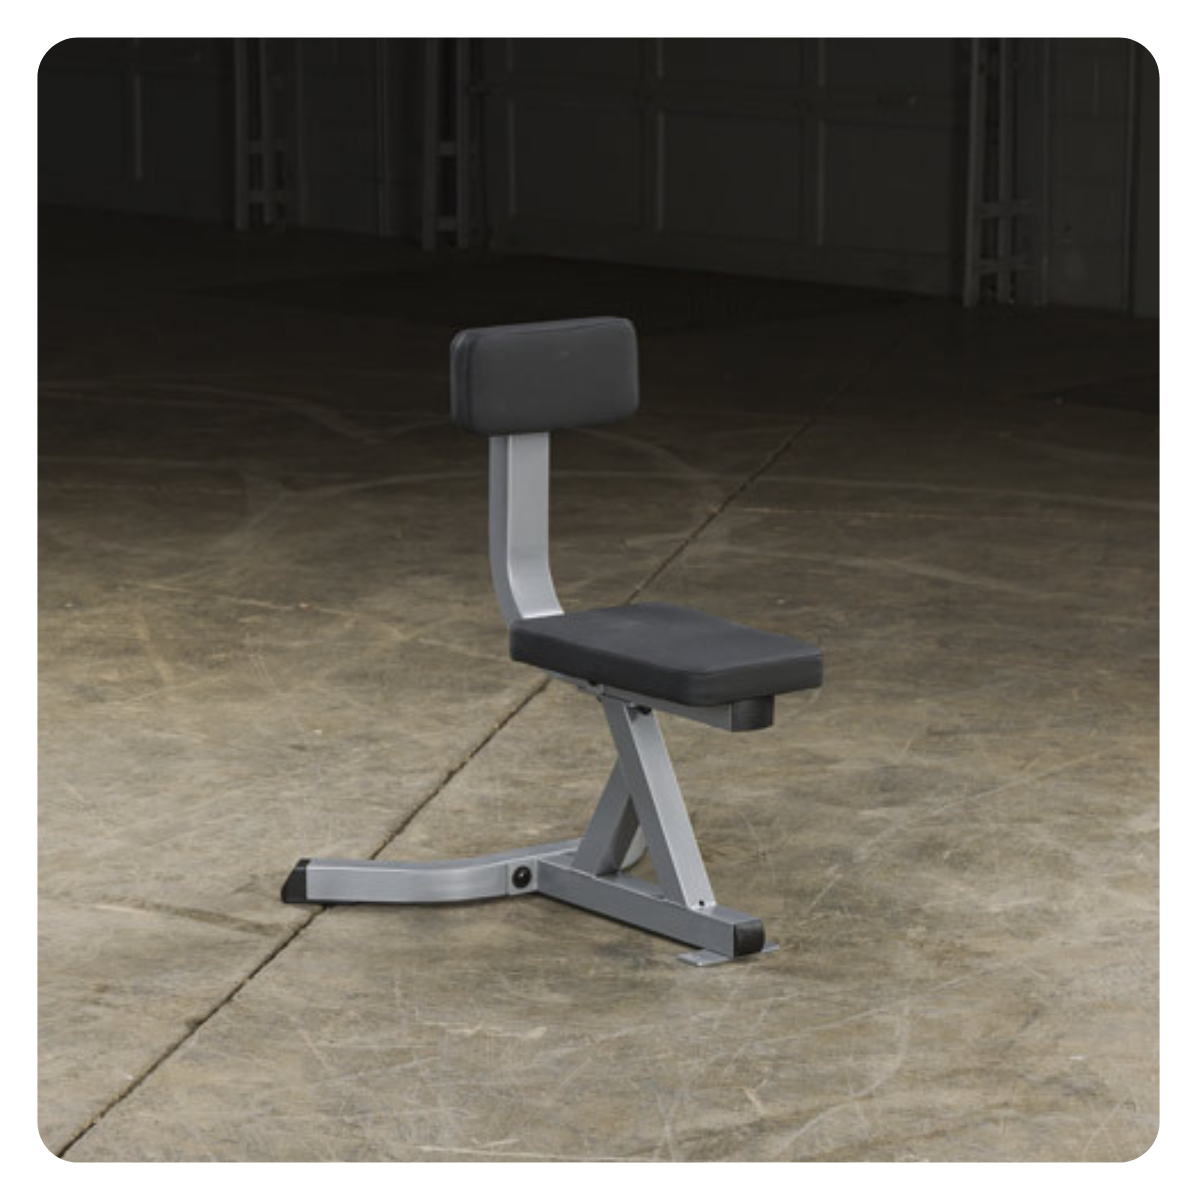 Body-Solid – Dumbbell Utility Stool